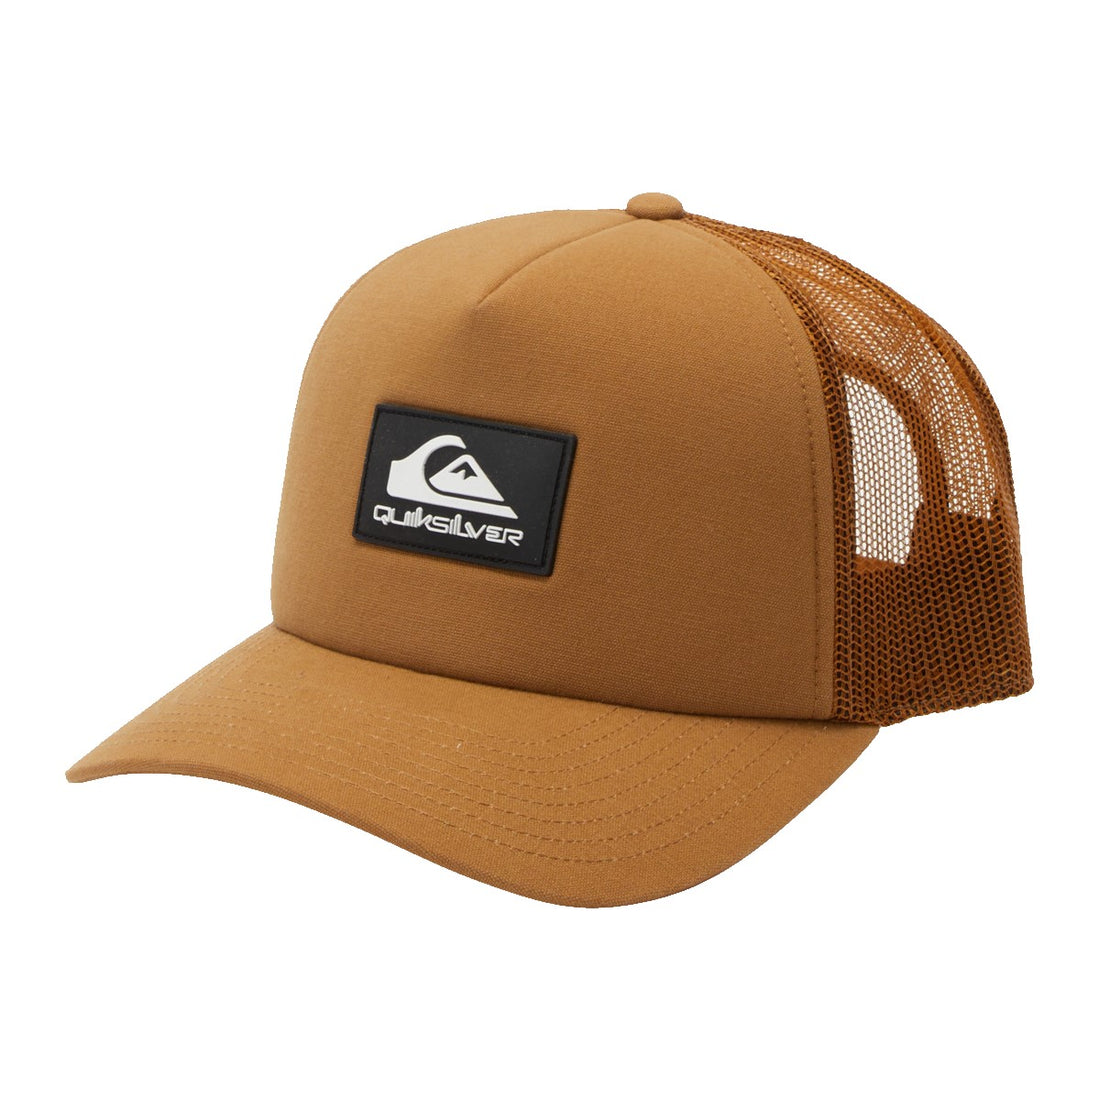 Buy the Best Hats & Caps Online at Freeride Surf & Skate – Tagged \